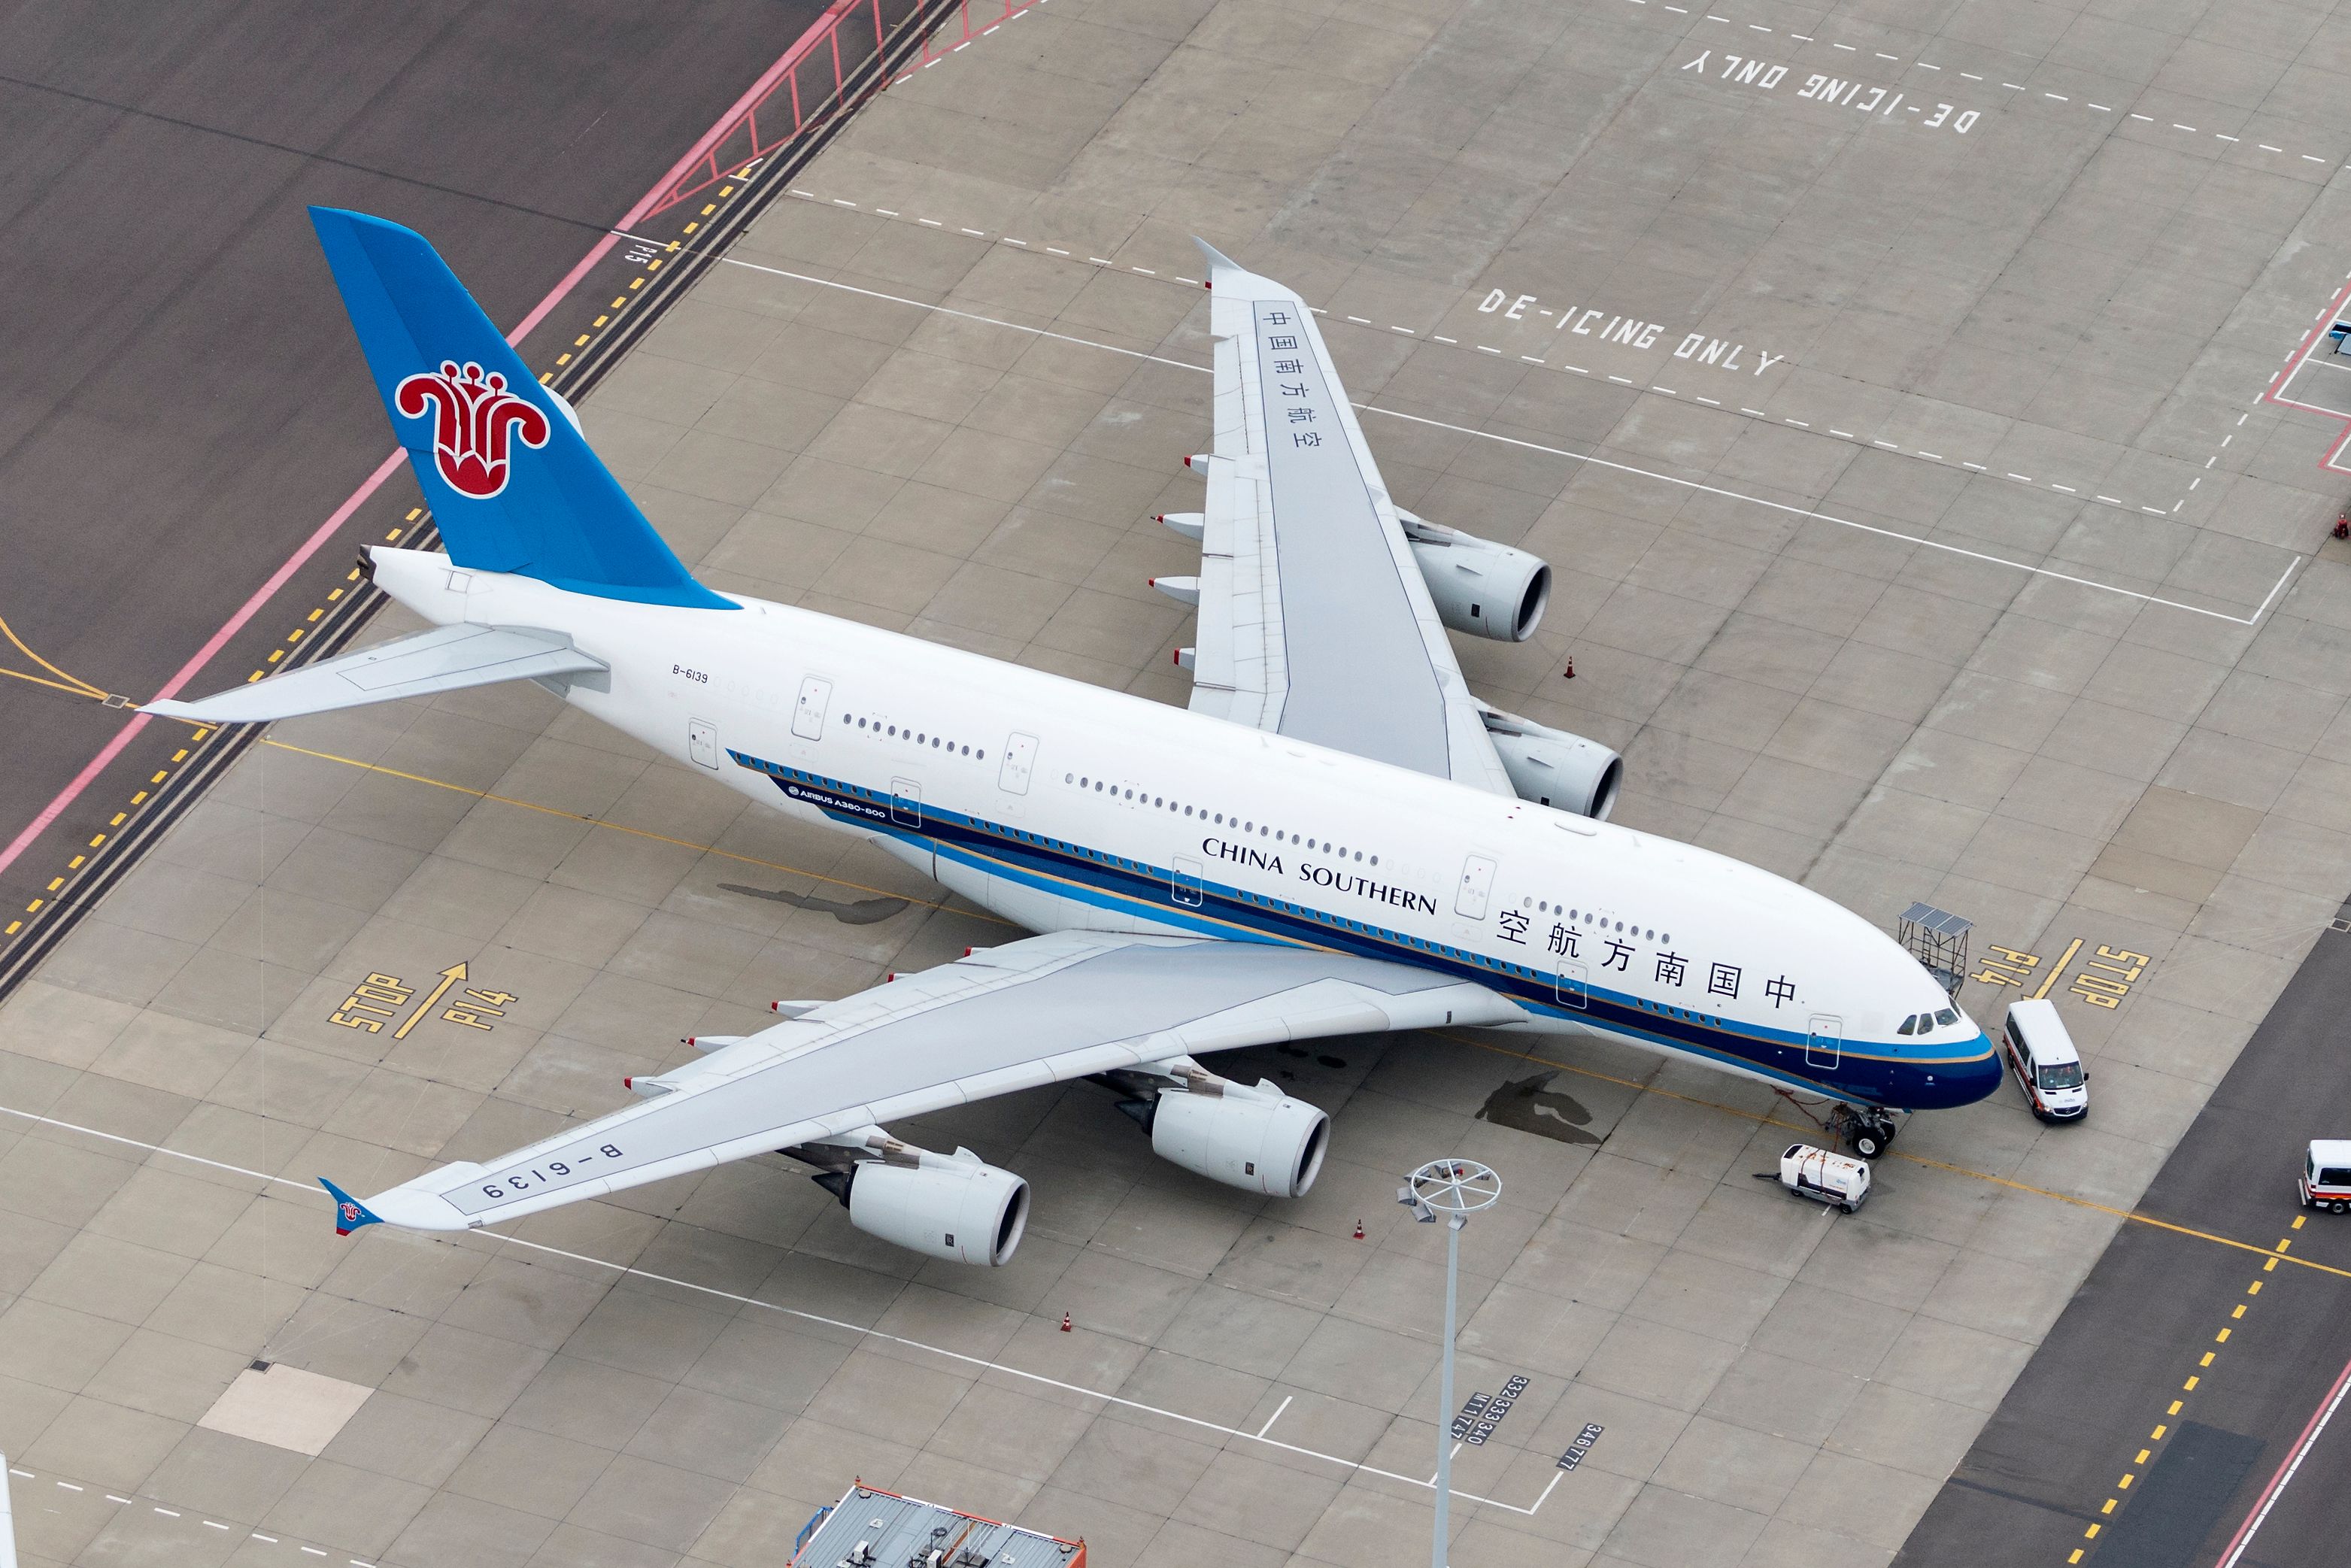 A China Southern A380 parked at an airport.